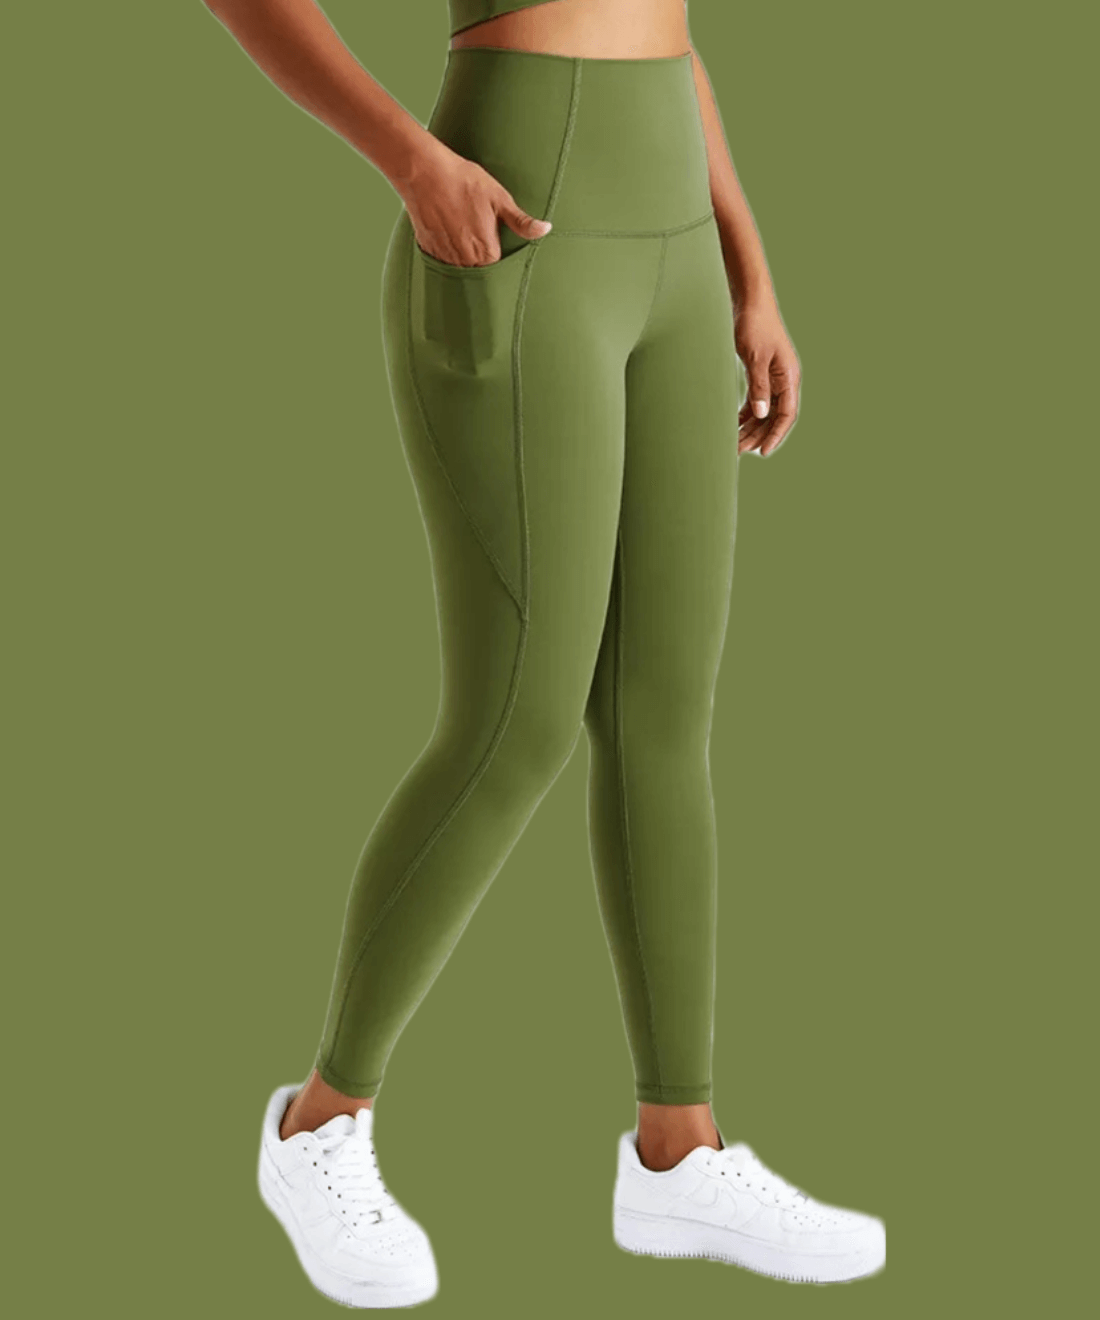 Women Activewear Leggings with Pockets